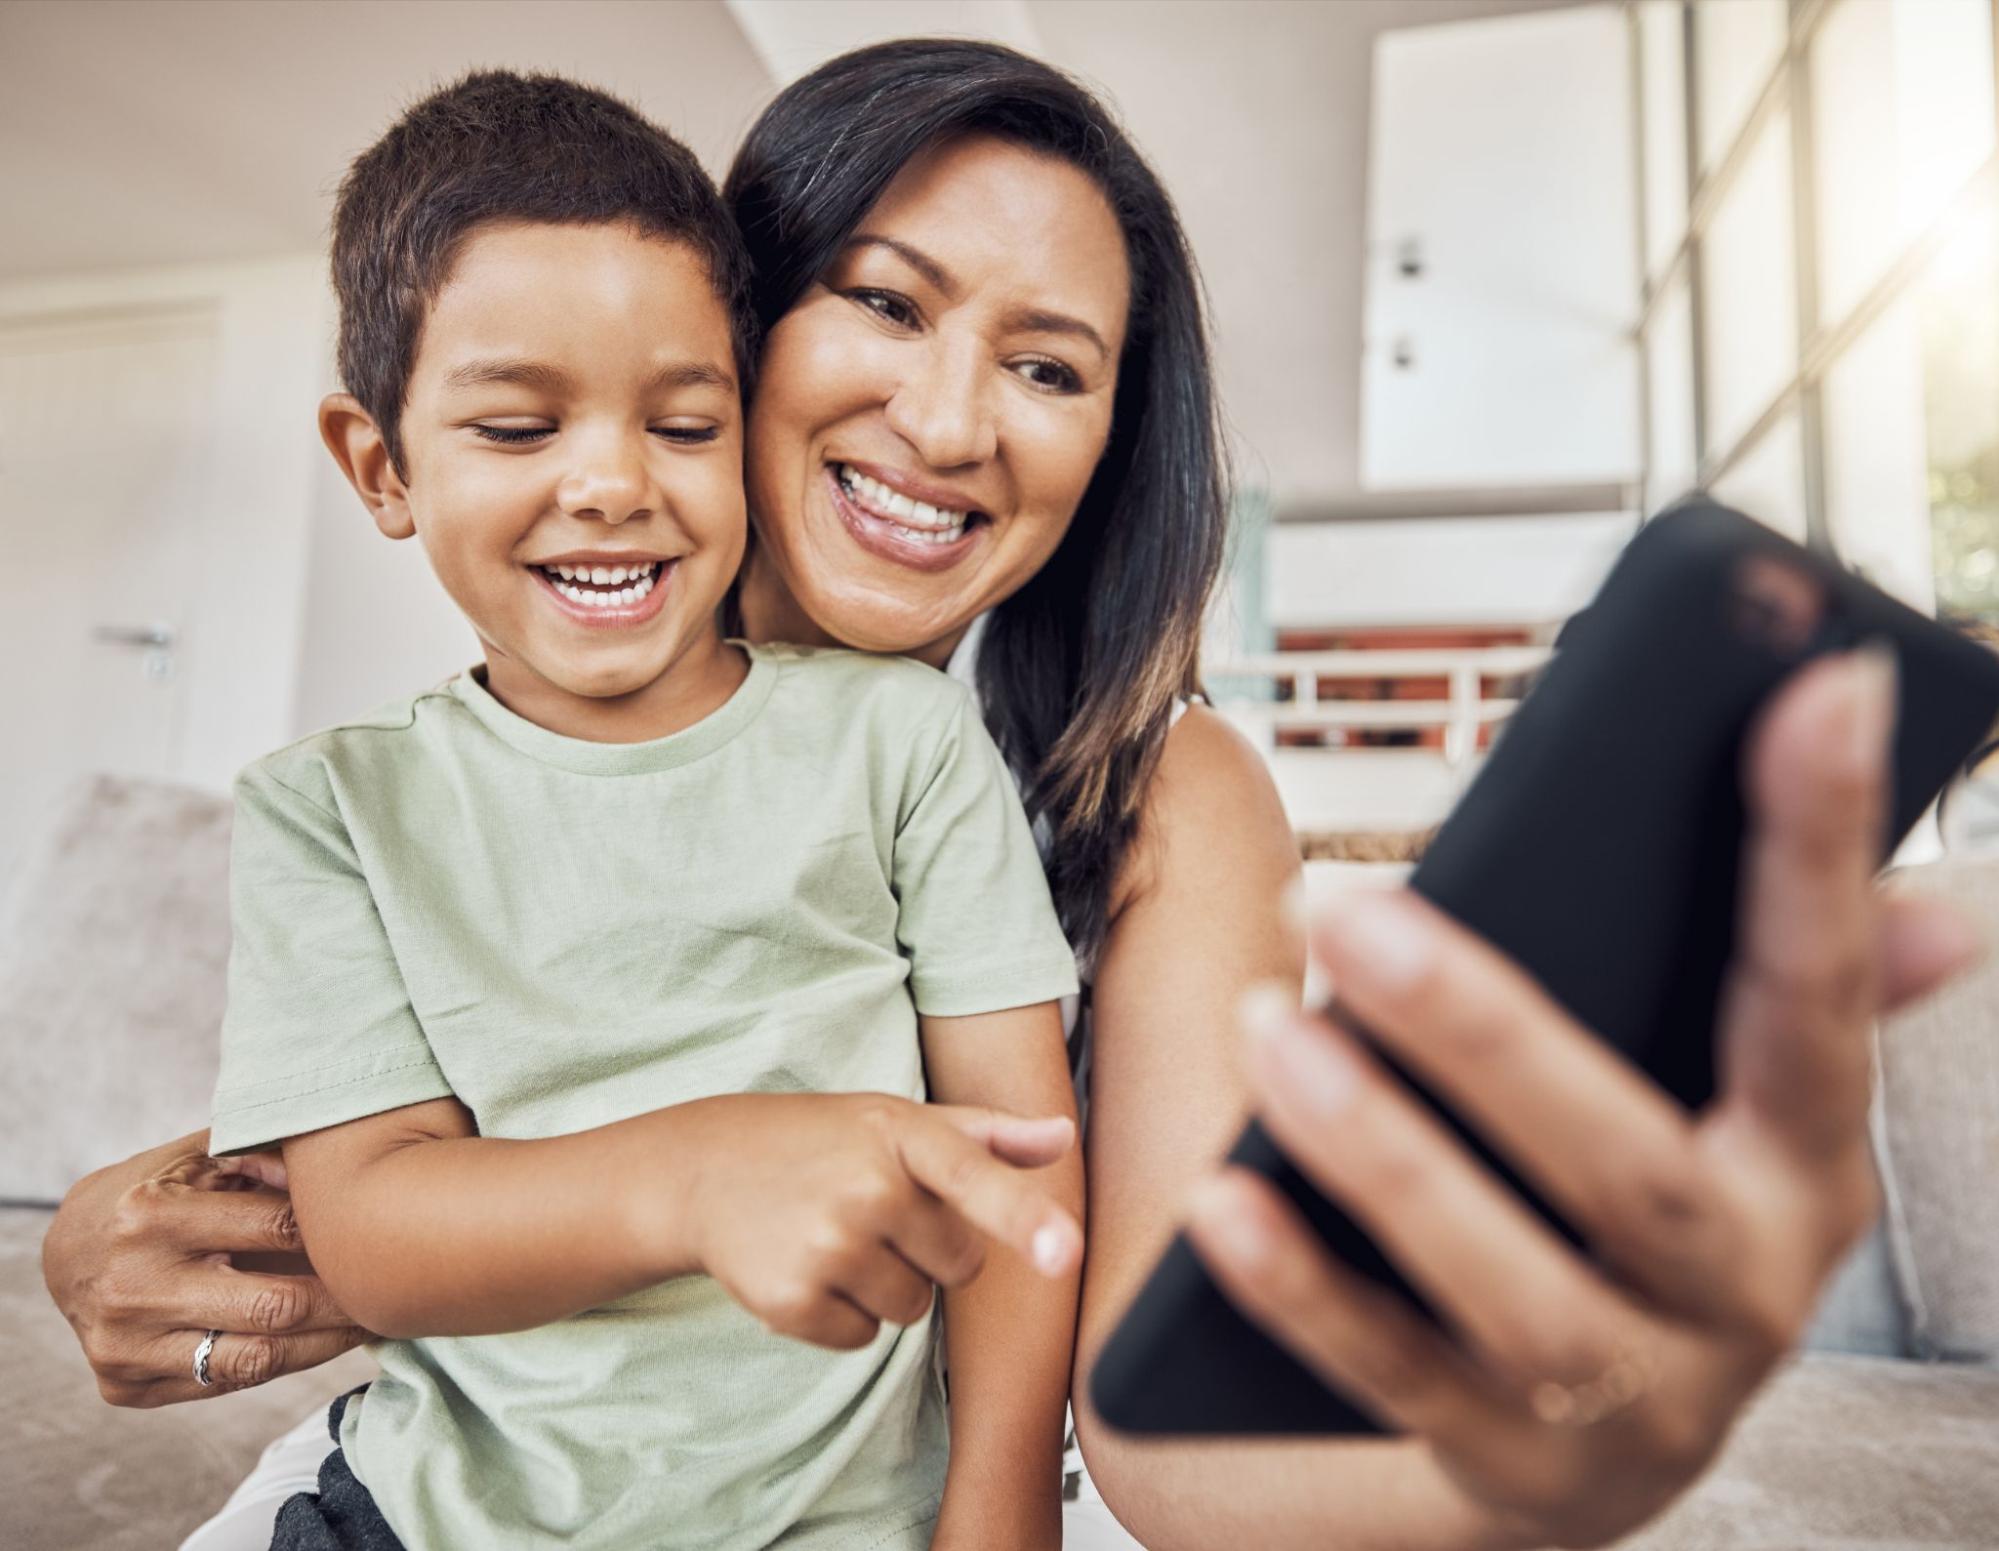 A mother and her child are smiling as they look at a mobile phone.